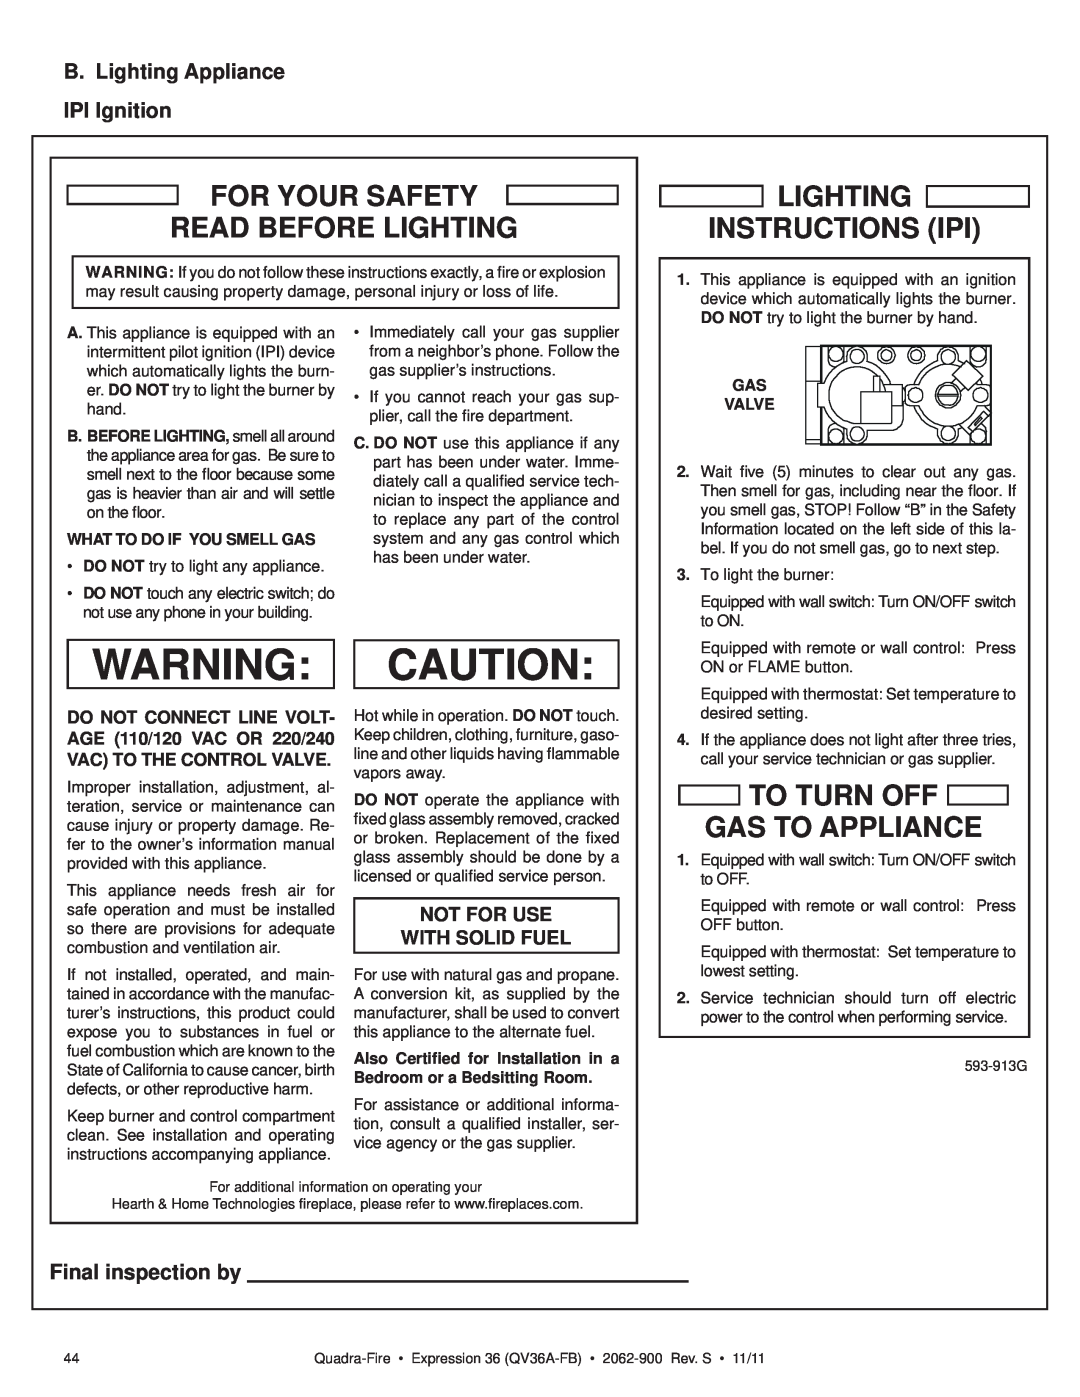 Quadra-Fire QV36A-FB For Your Safety Read Before Lighting, Lighting Instructions Ipi, To Turn Off Gas To Appliance 